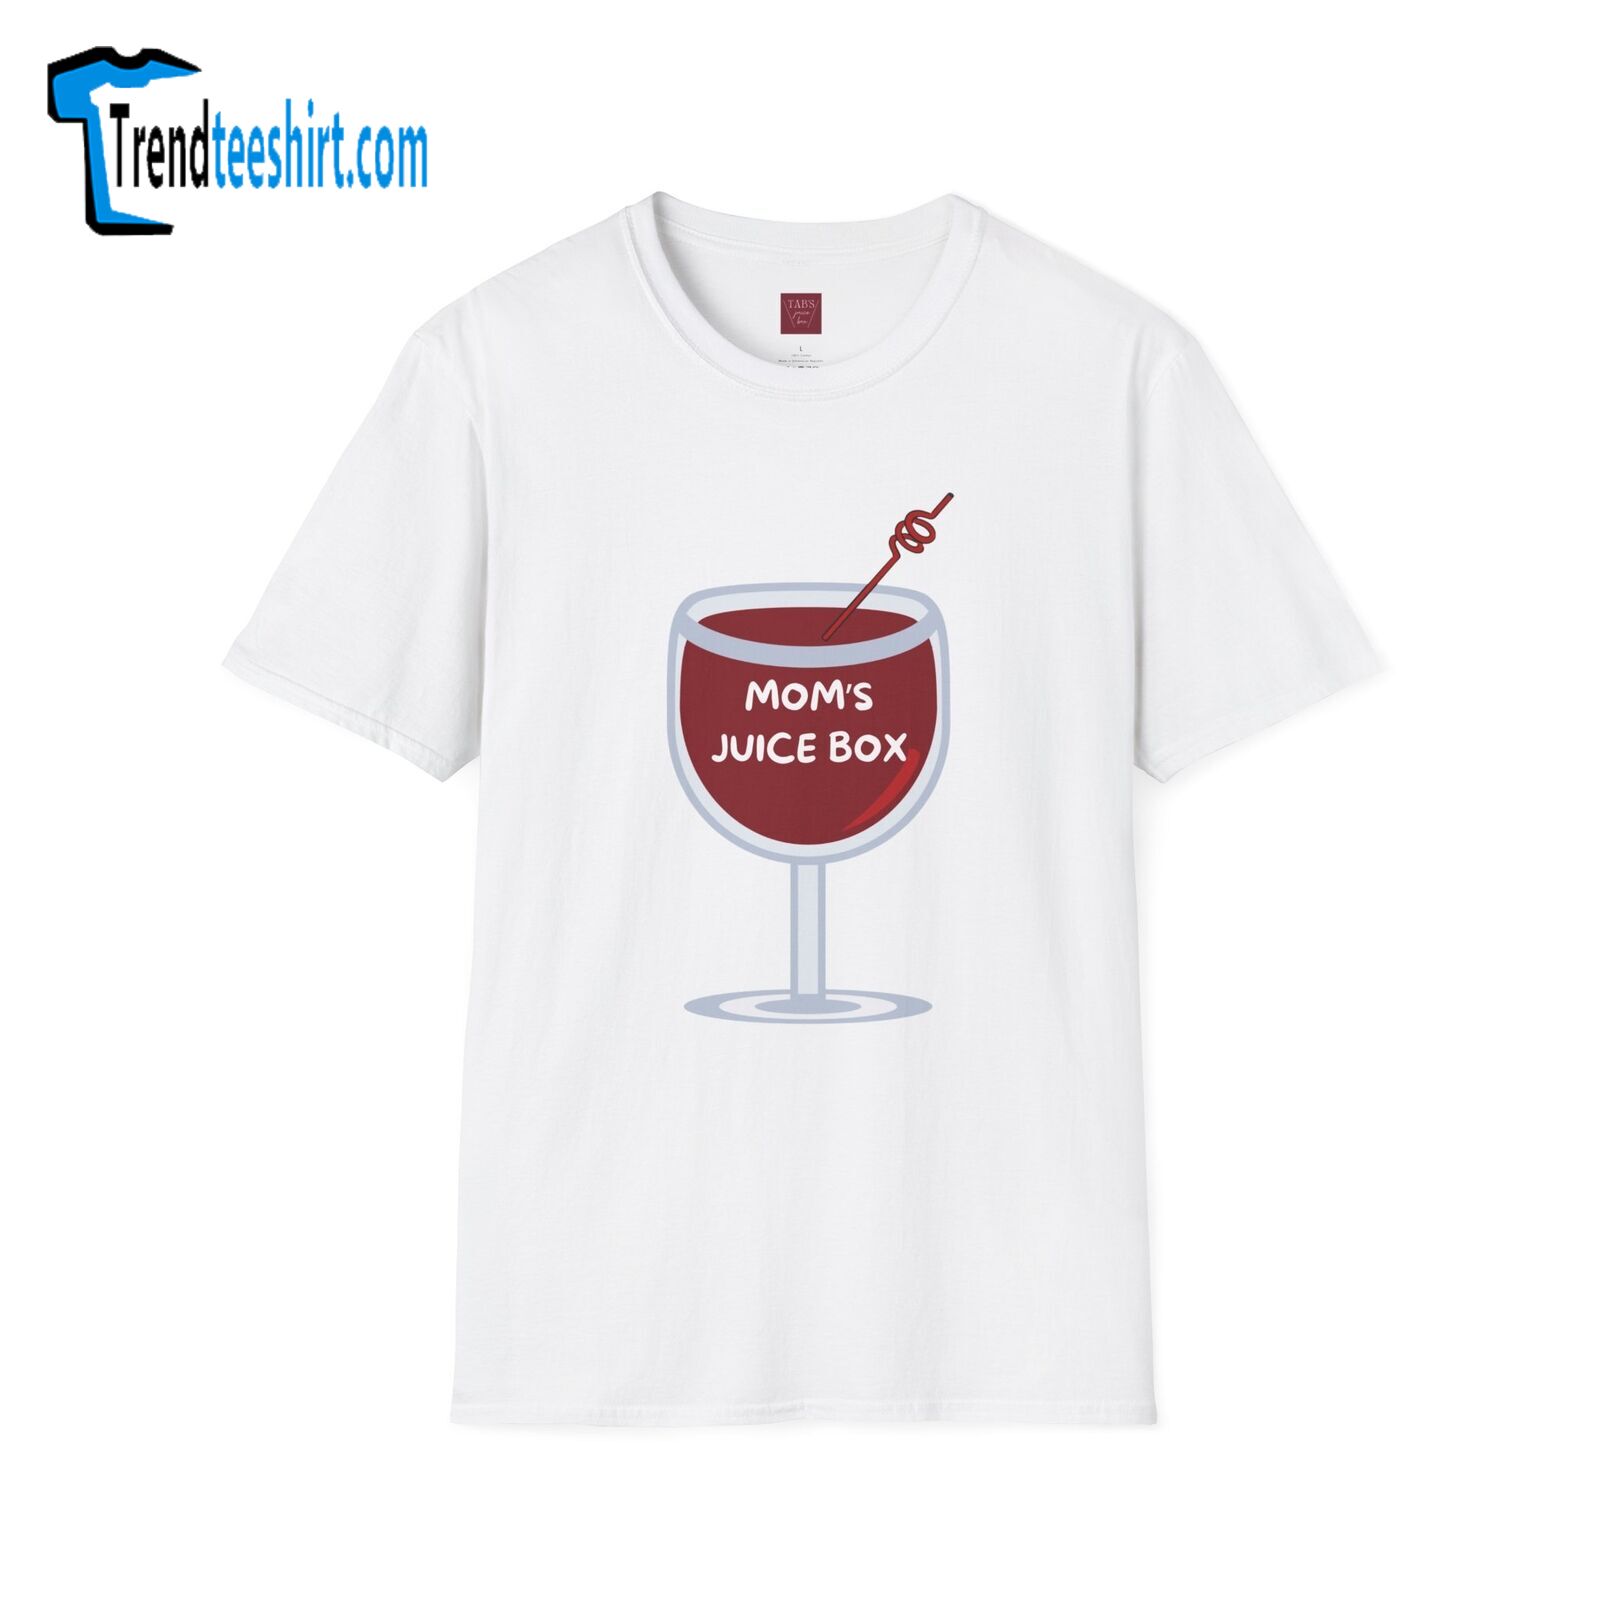 Mom's Juice Boxwine T-shirtmother's Day Giftwine Lover Gift